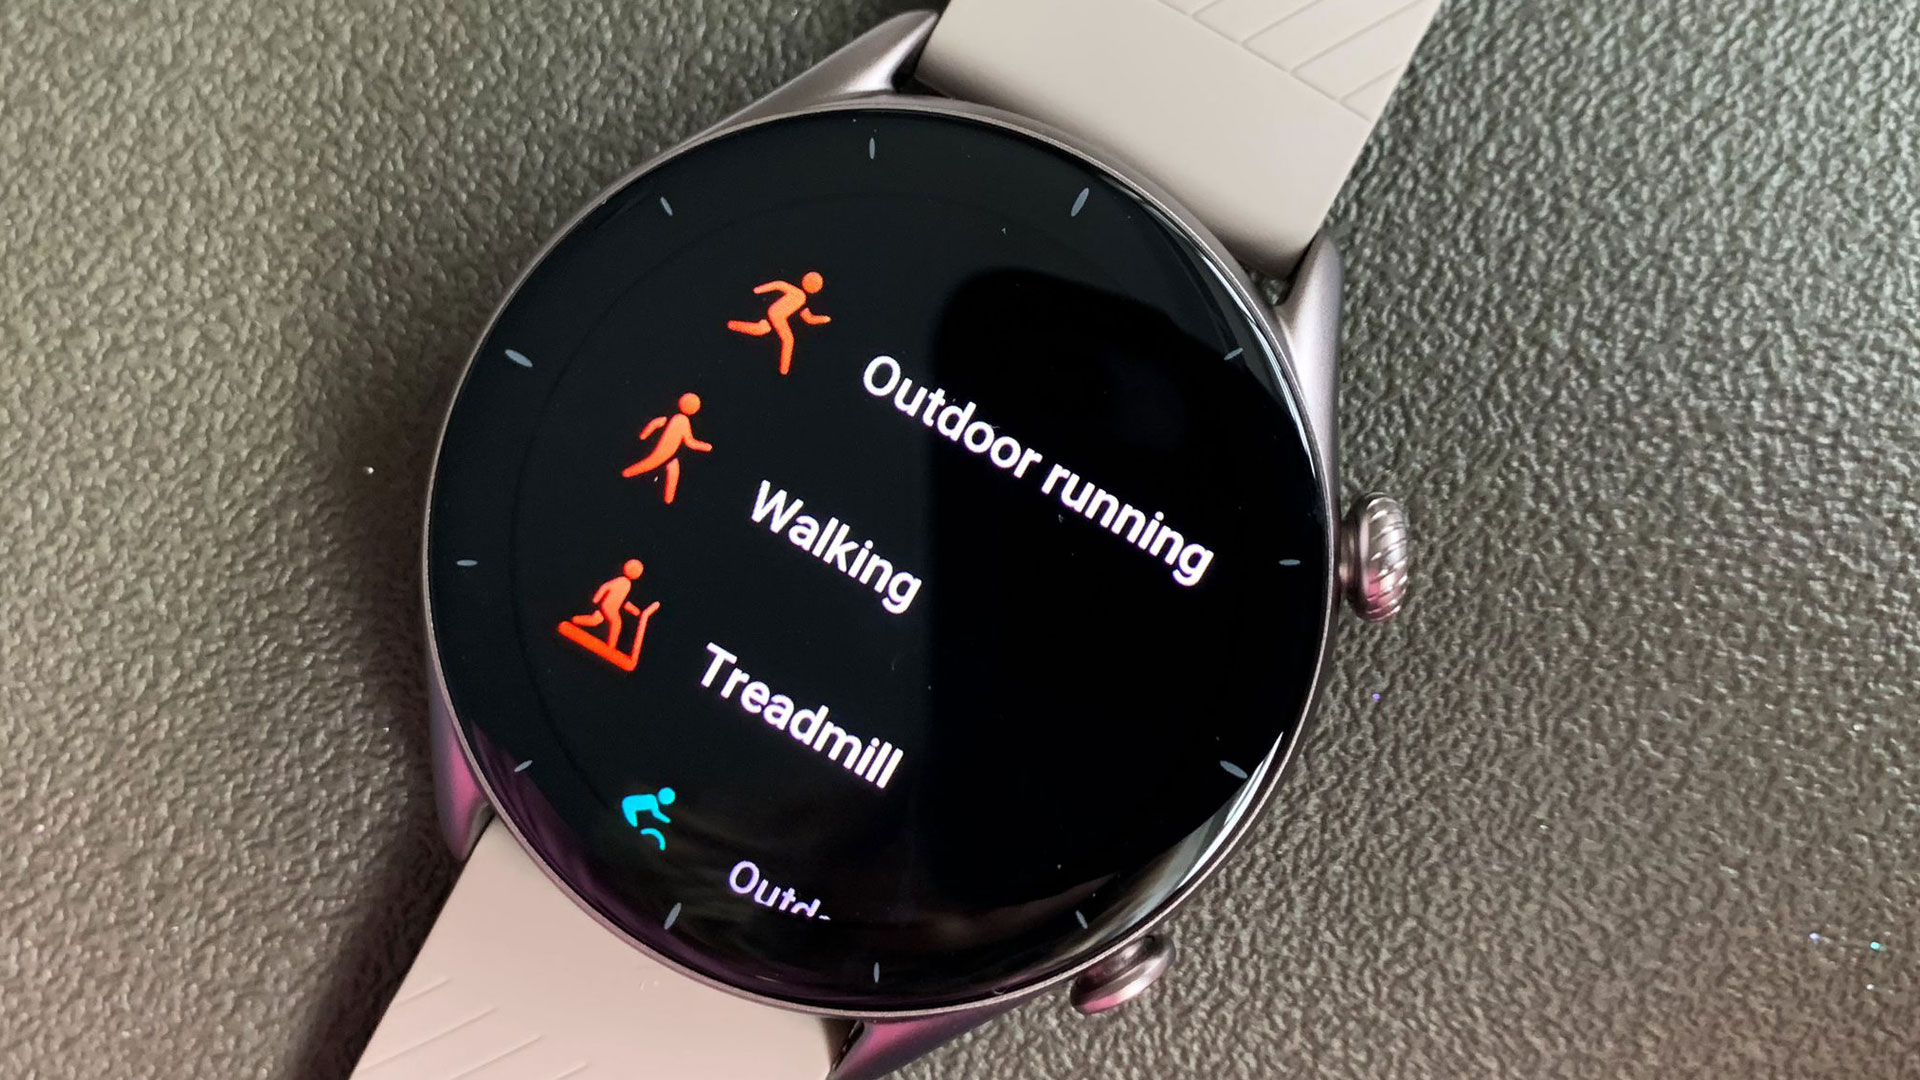 Image shows some of the activities tracked by the Amazfit GTR 3.